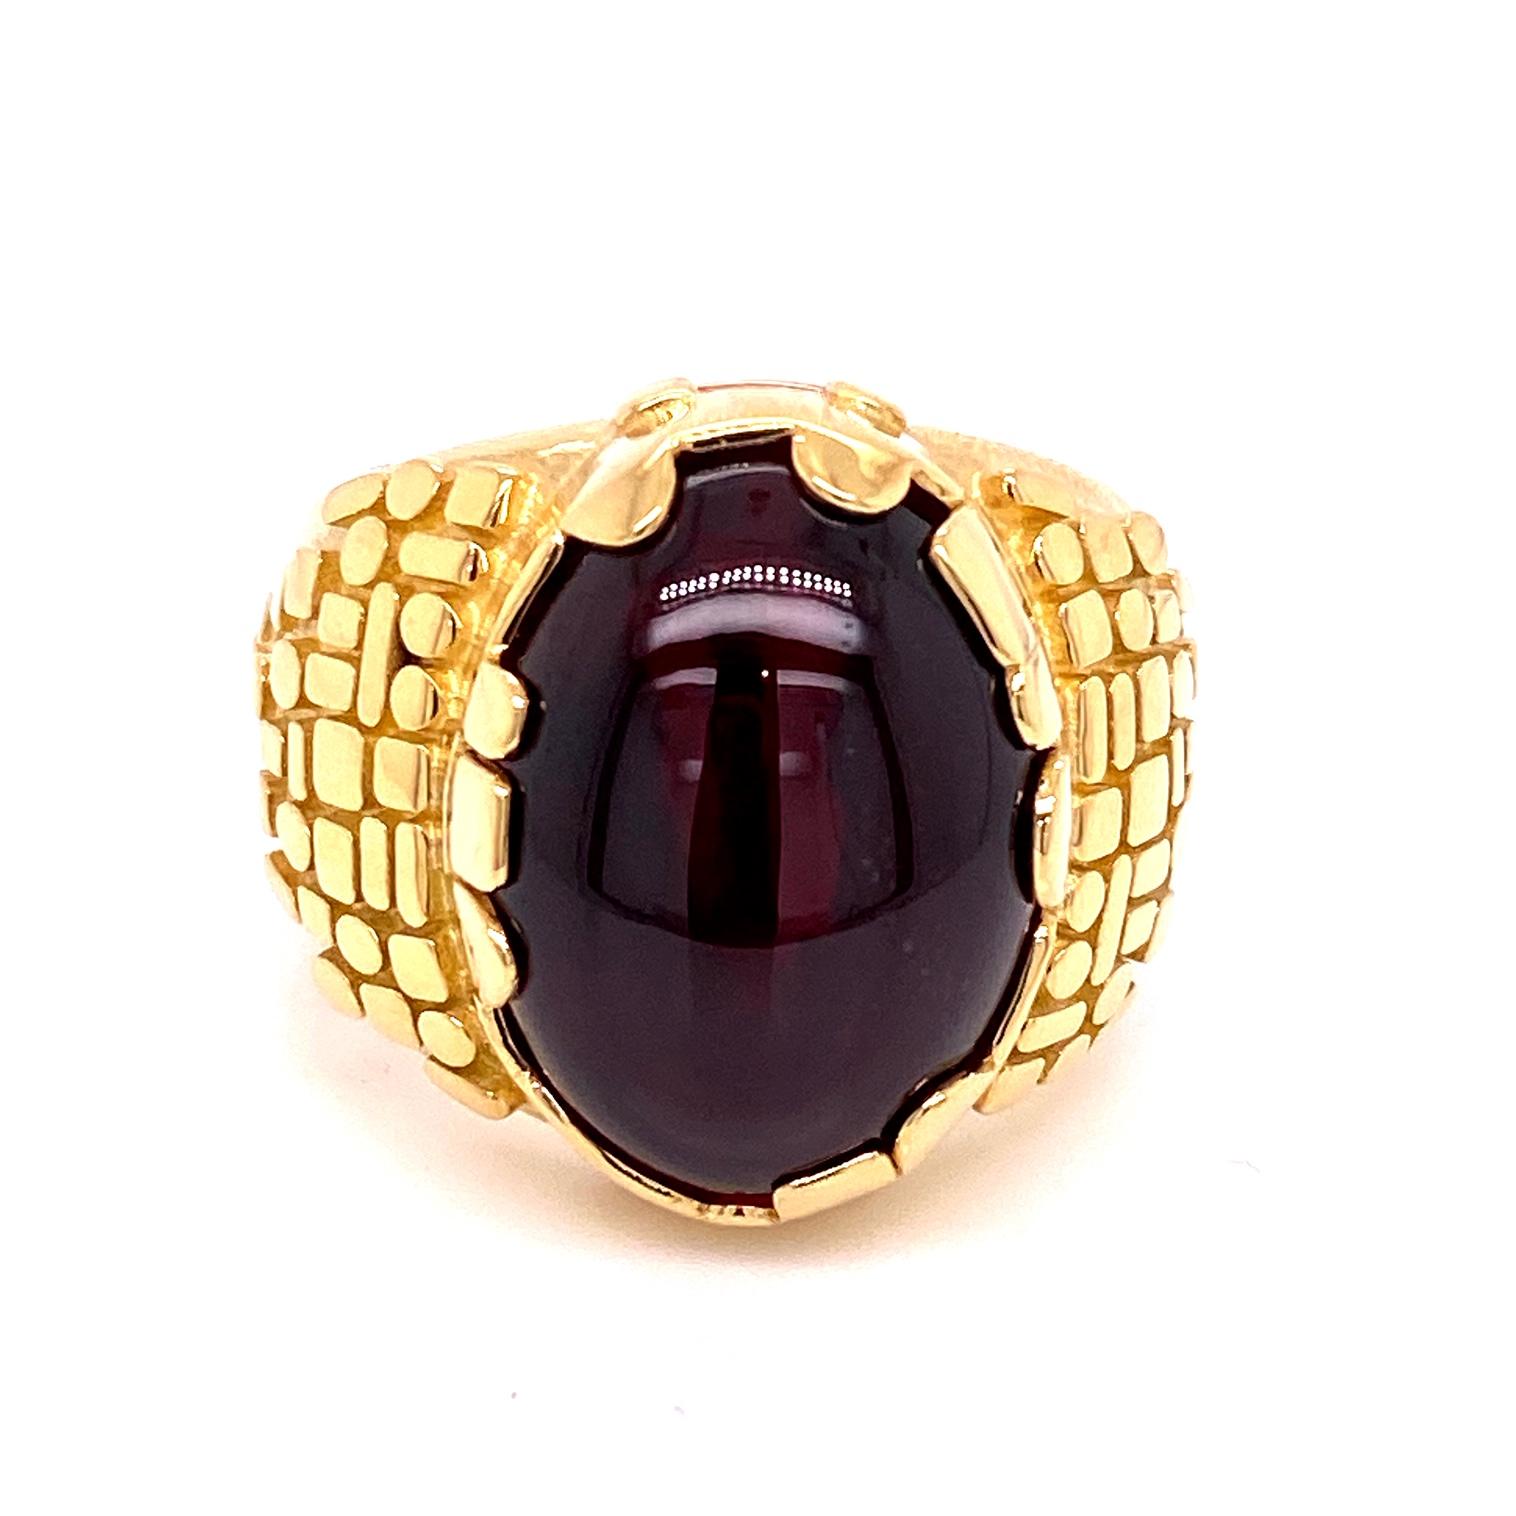 An 18k yellow and rose gold Men's ring set with one oval 12.84 carat carbunckle garnet ring (18mm x 13mm), ring size 10. This ring was made and designed by llyn strong.